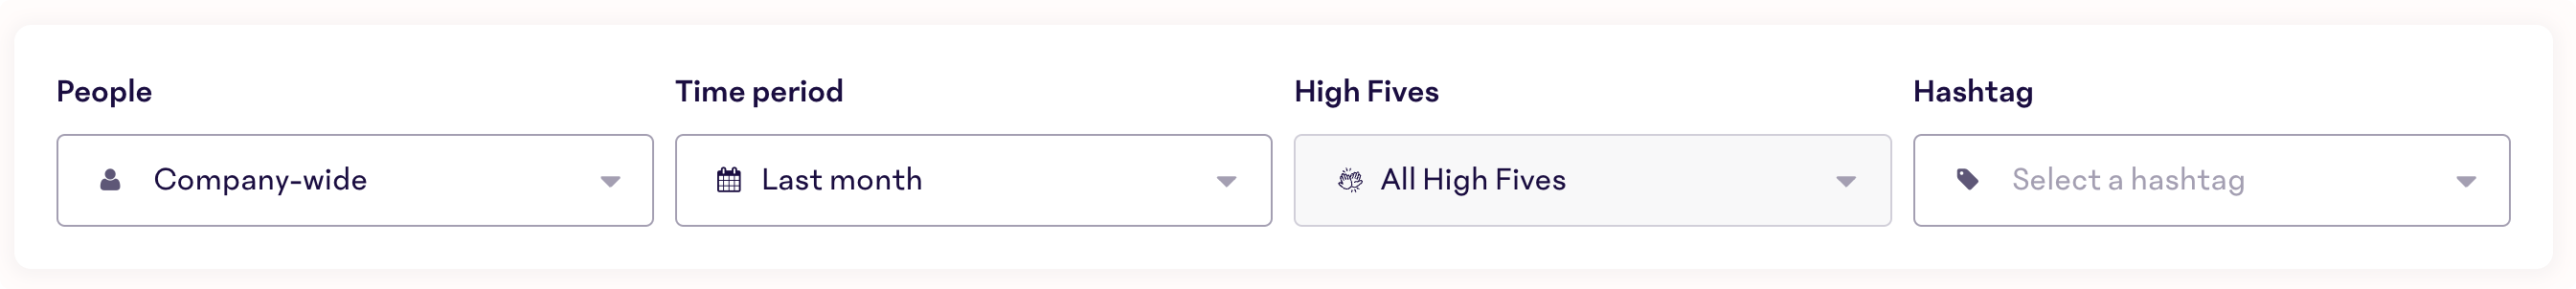 High-Fives-Feed-Filters.png